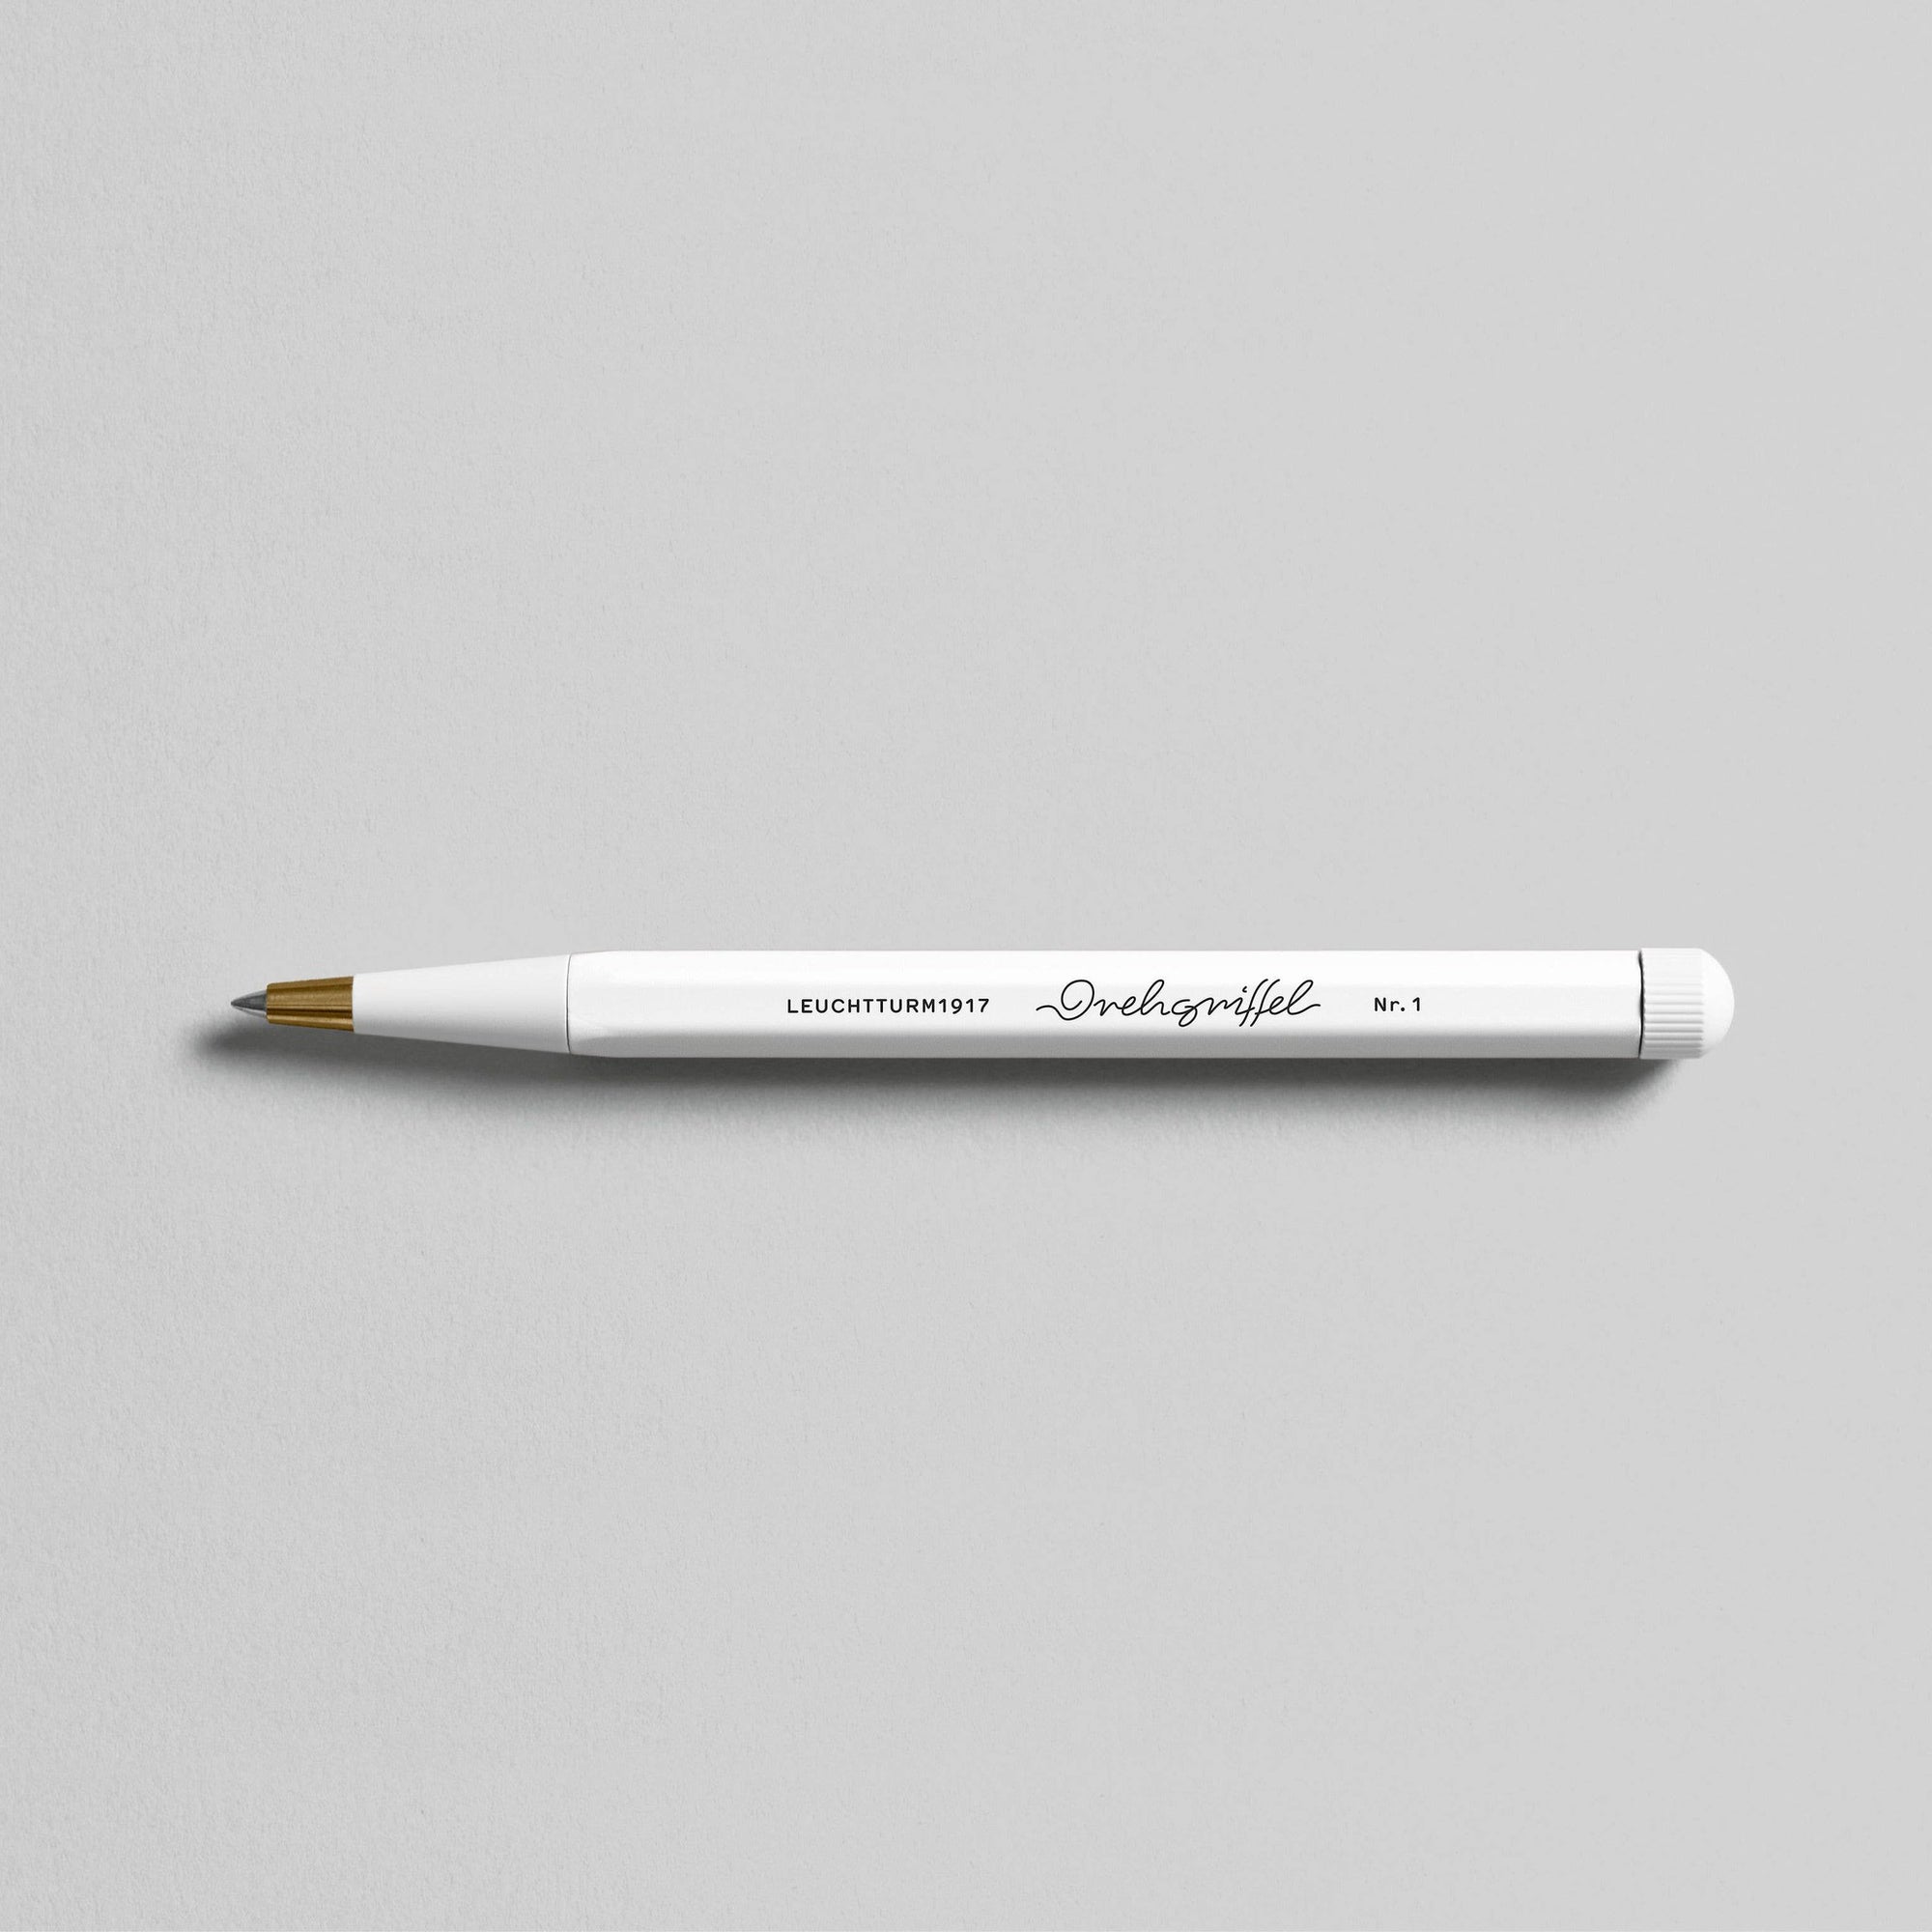 A LEUCHTTURM1917 Drehgriffel Nr. 1 - Gel Pen: White with a gold tip, Germany's finest writing instrument, on a gray surface.